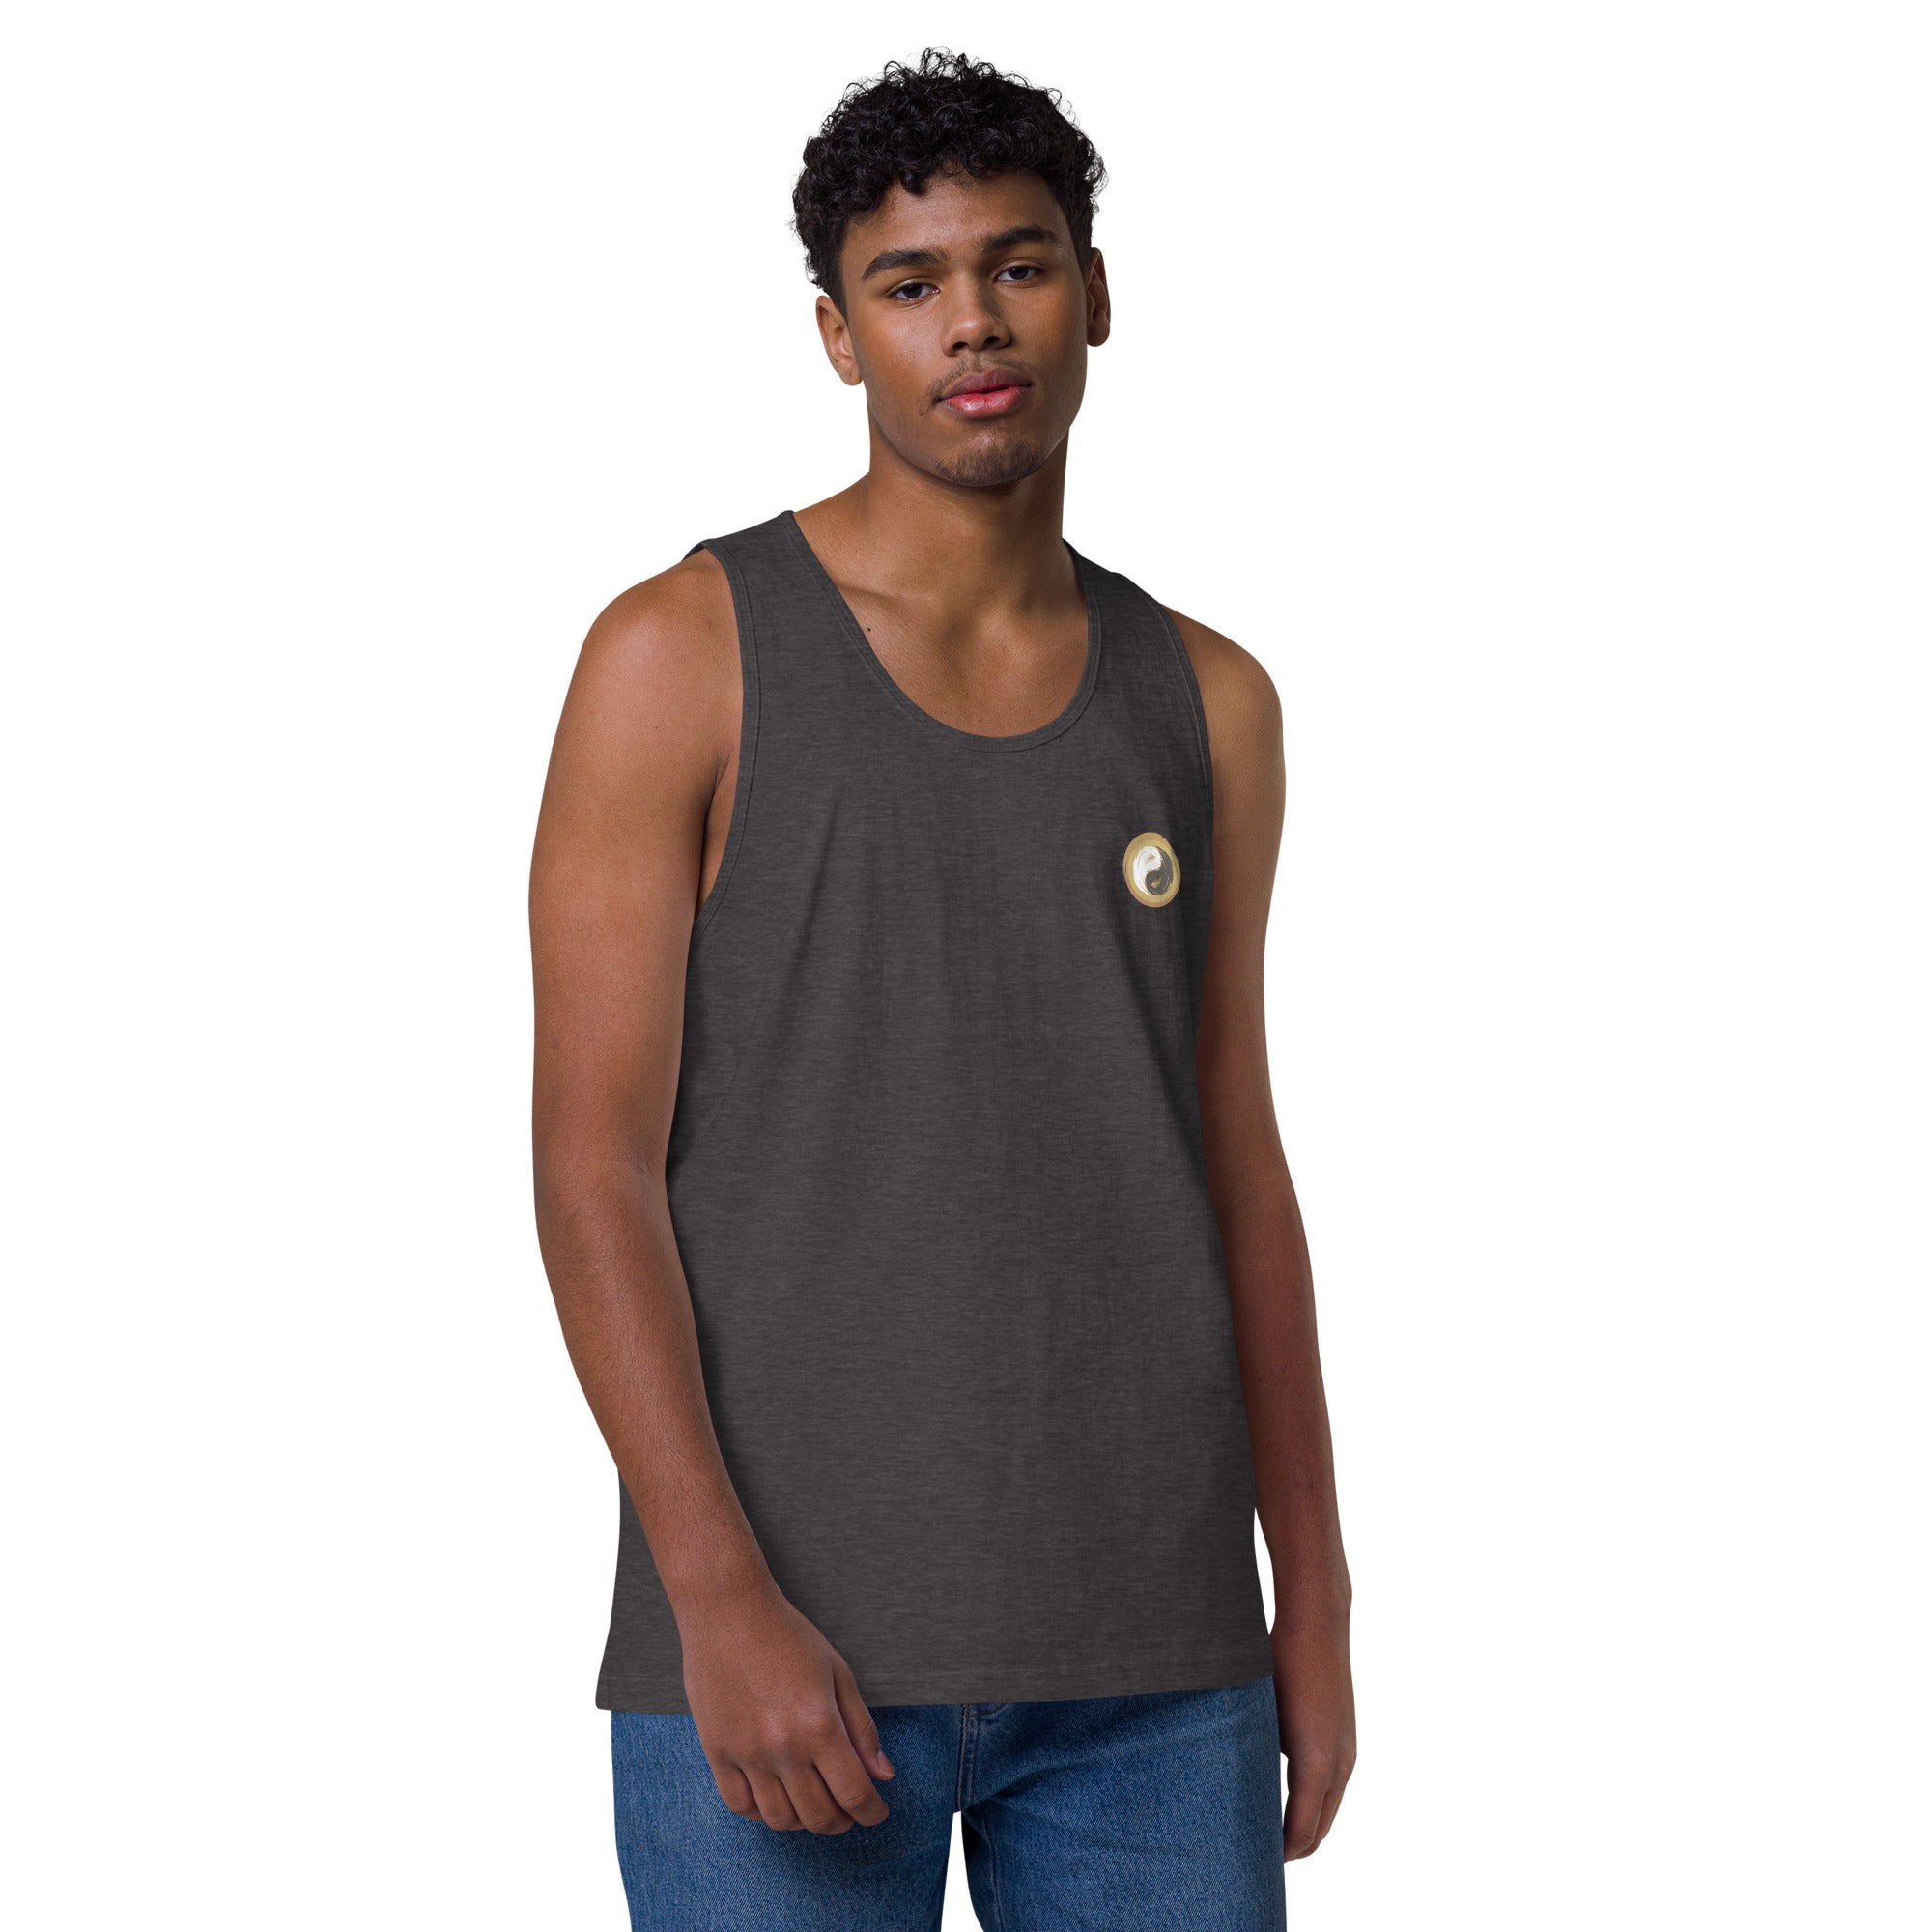 Men’s premium tank top - Personal Hour for Yoga and Meditations 